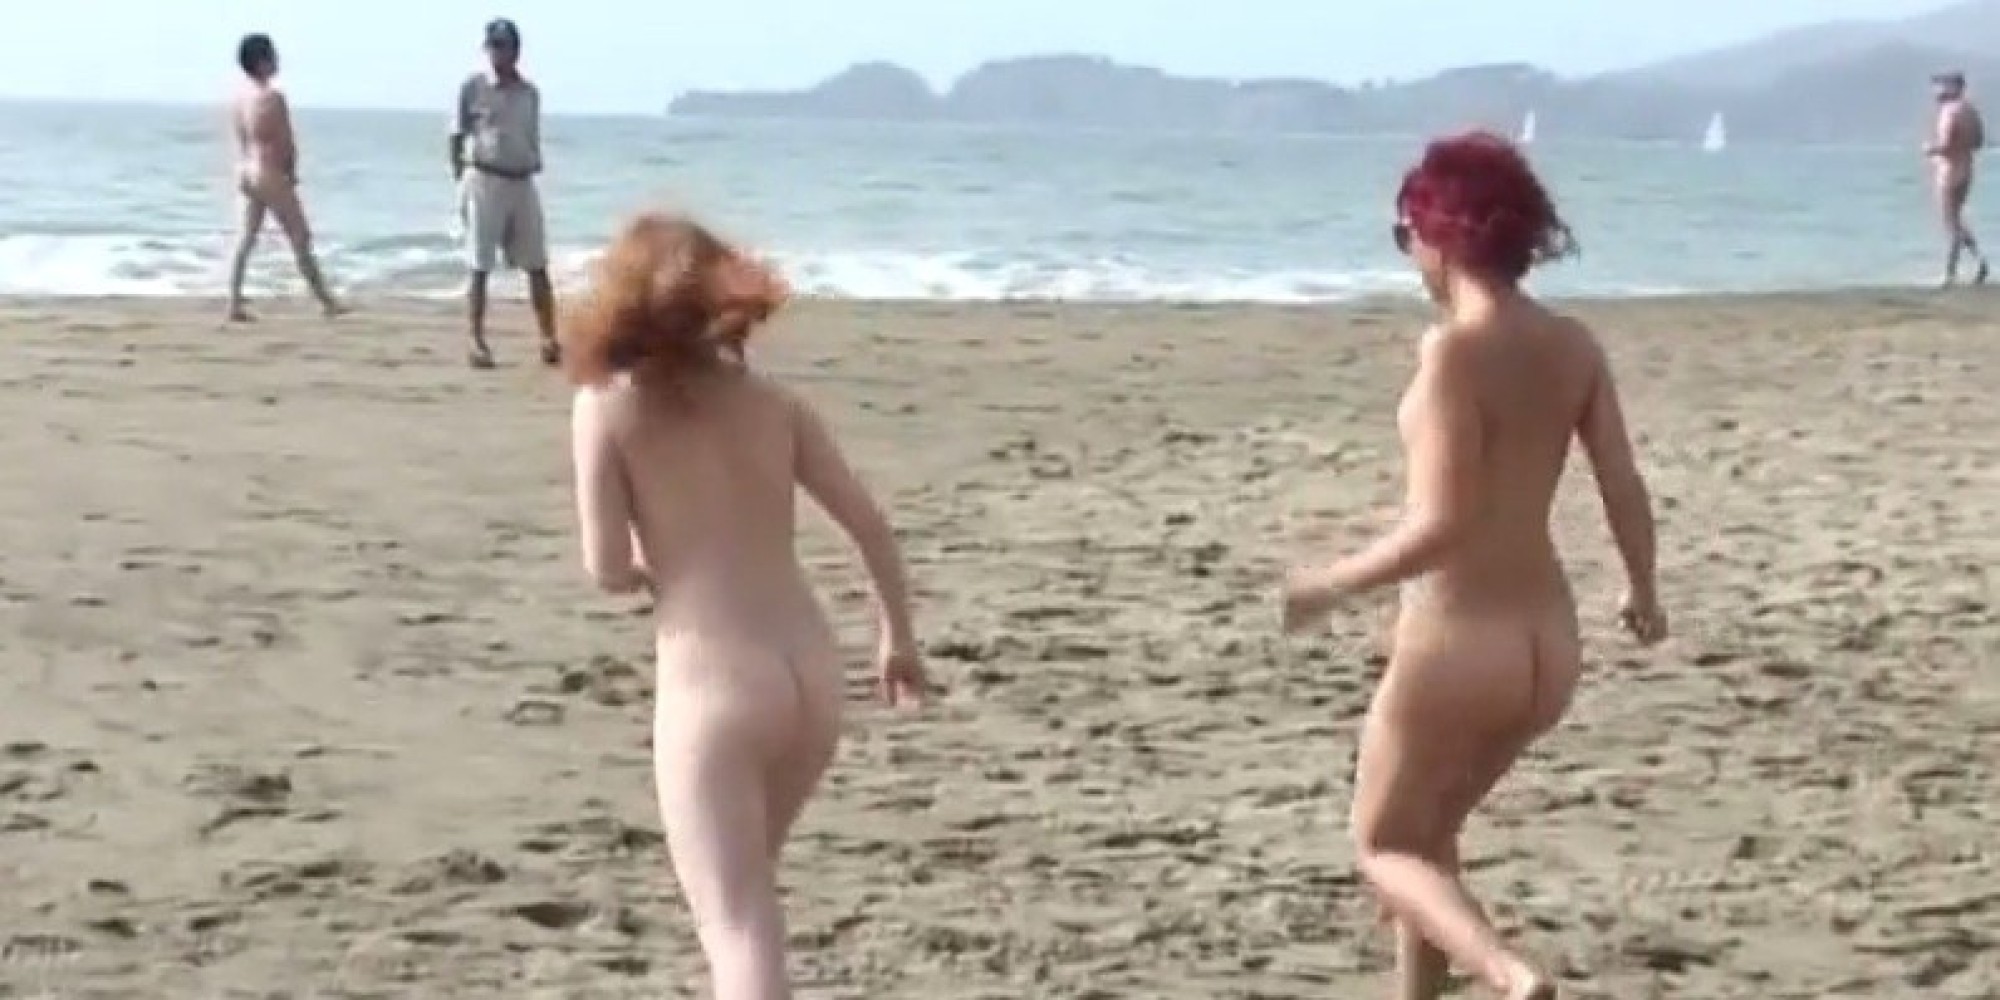 Nude Olympics Lets It All Hang Out On San Francisco Beach. aol.com news tod...